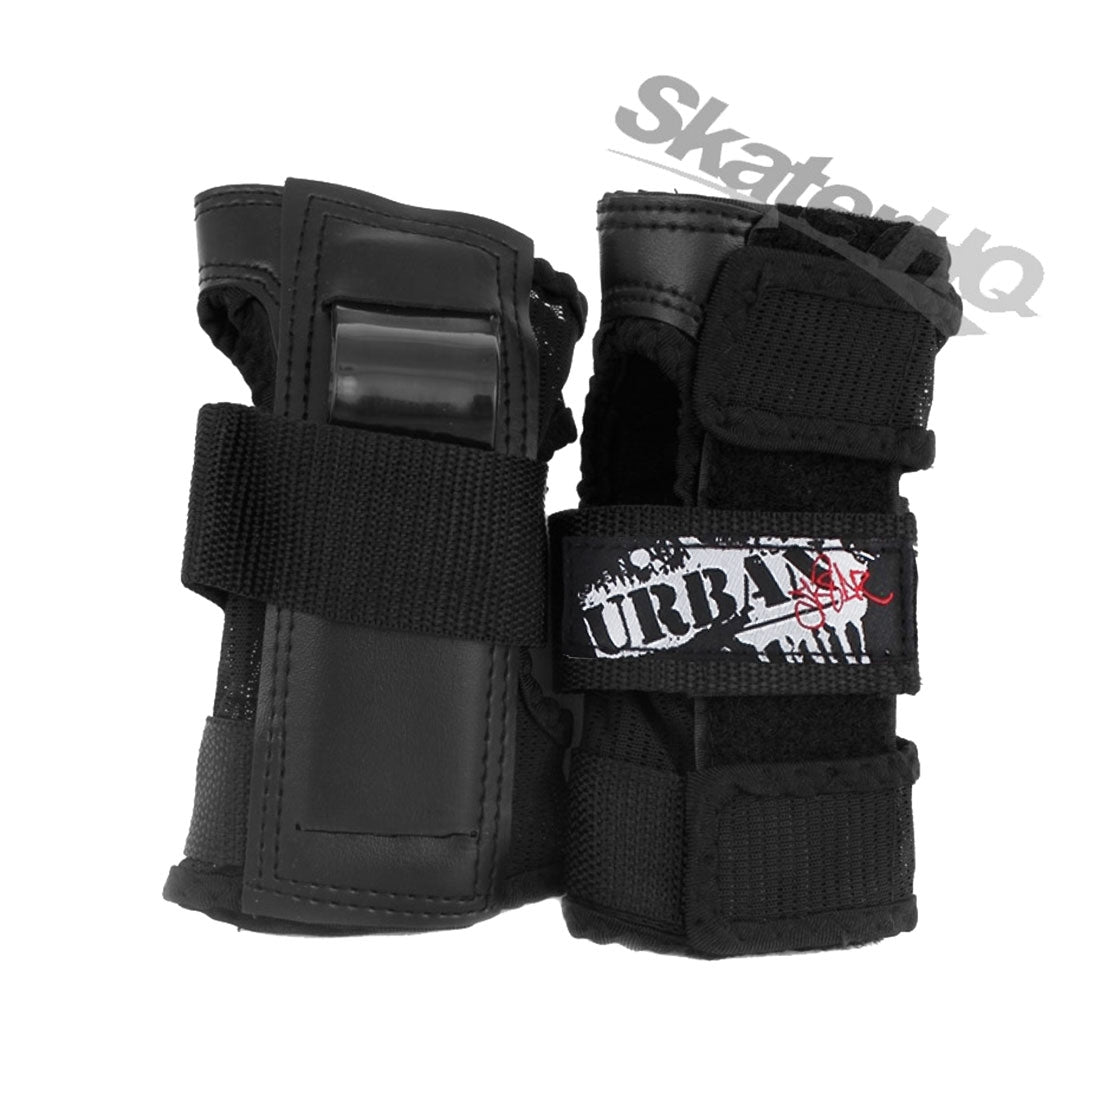 Urban Skater Wrist Guards - Small Protective Gear